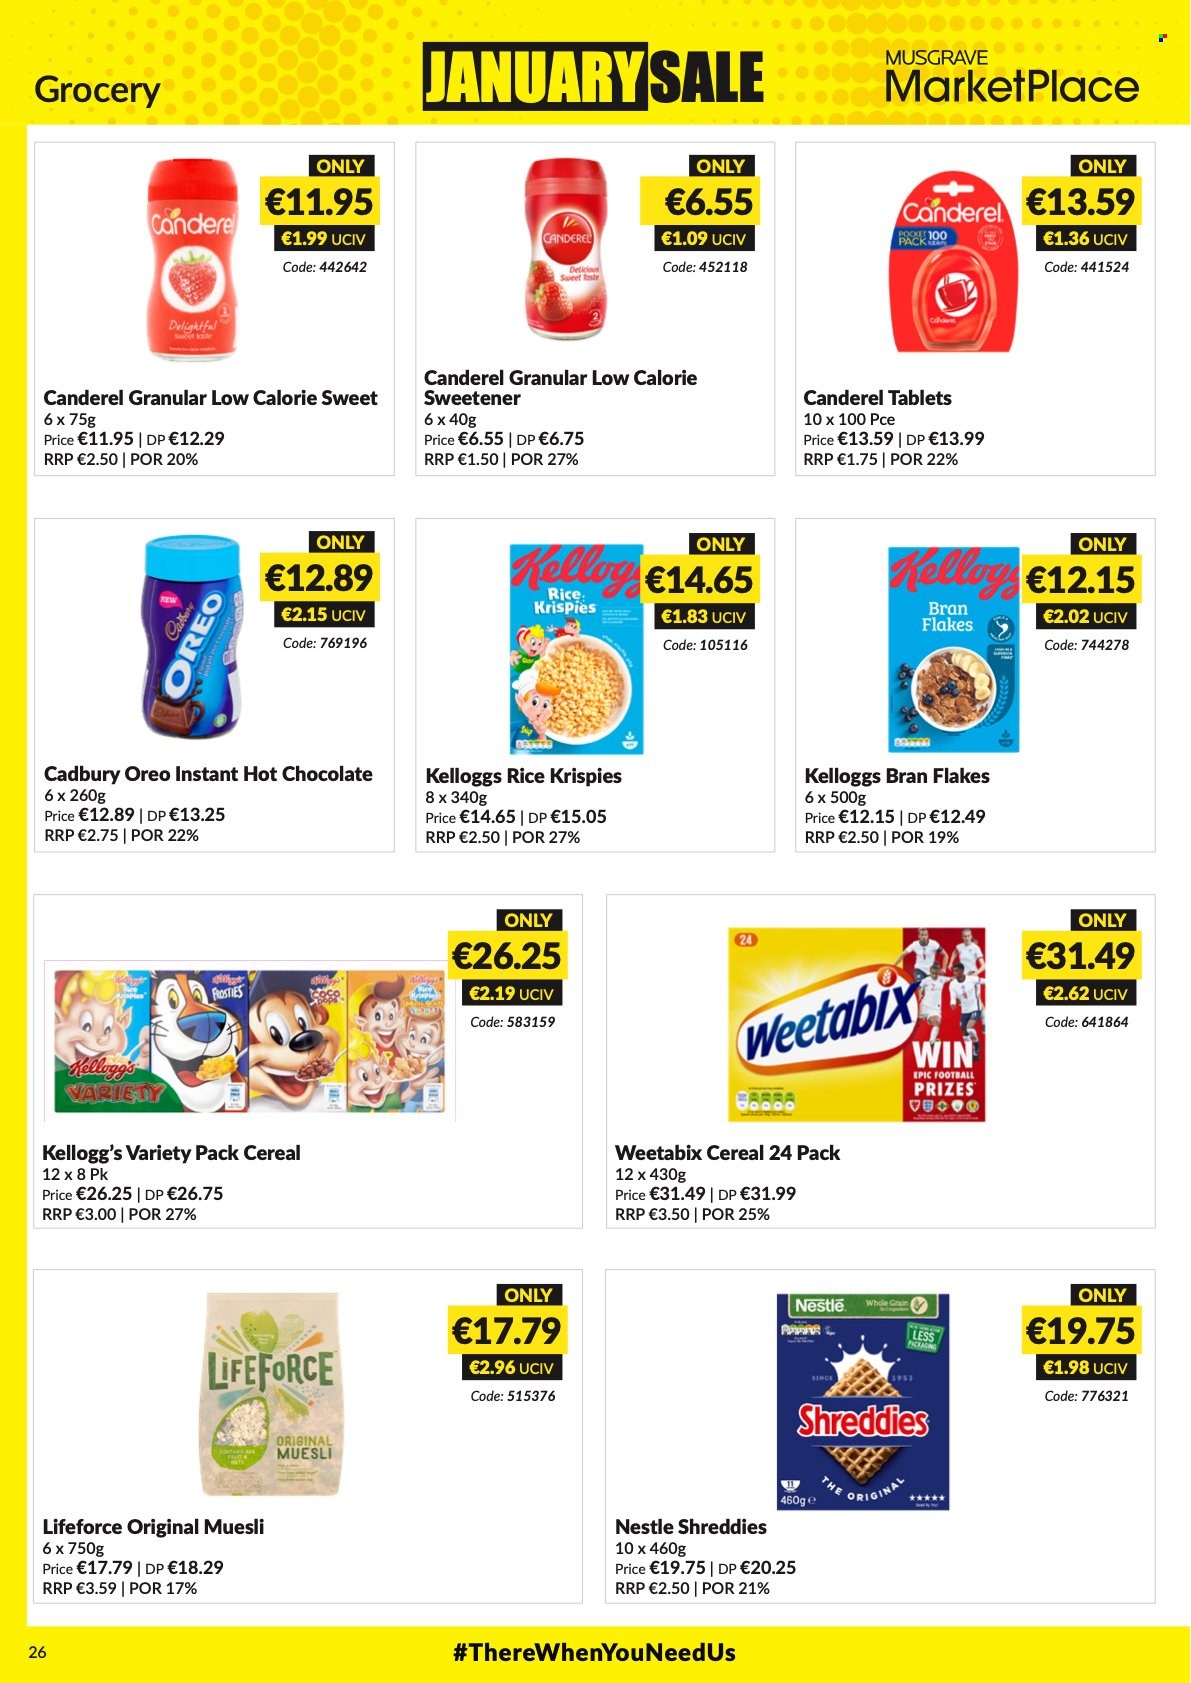 thumbnail - MUSGRAVE Market Place offer  - 26.12.2021 - 15.01.2022 - Sales products - Oreo, Nestlé, Kellogg's, Cadbury, Canderel, sweetener, cereals, muesli, Rice Krispies, Weetabix, bran flakes, hot chocolate. Page 26.